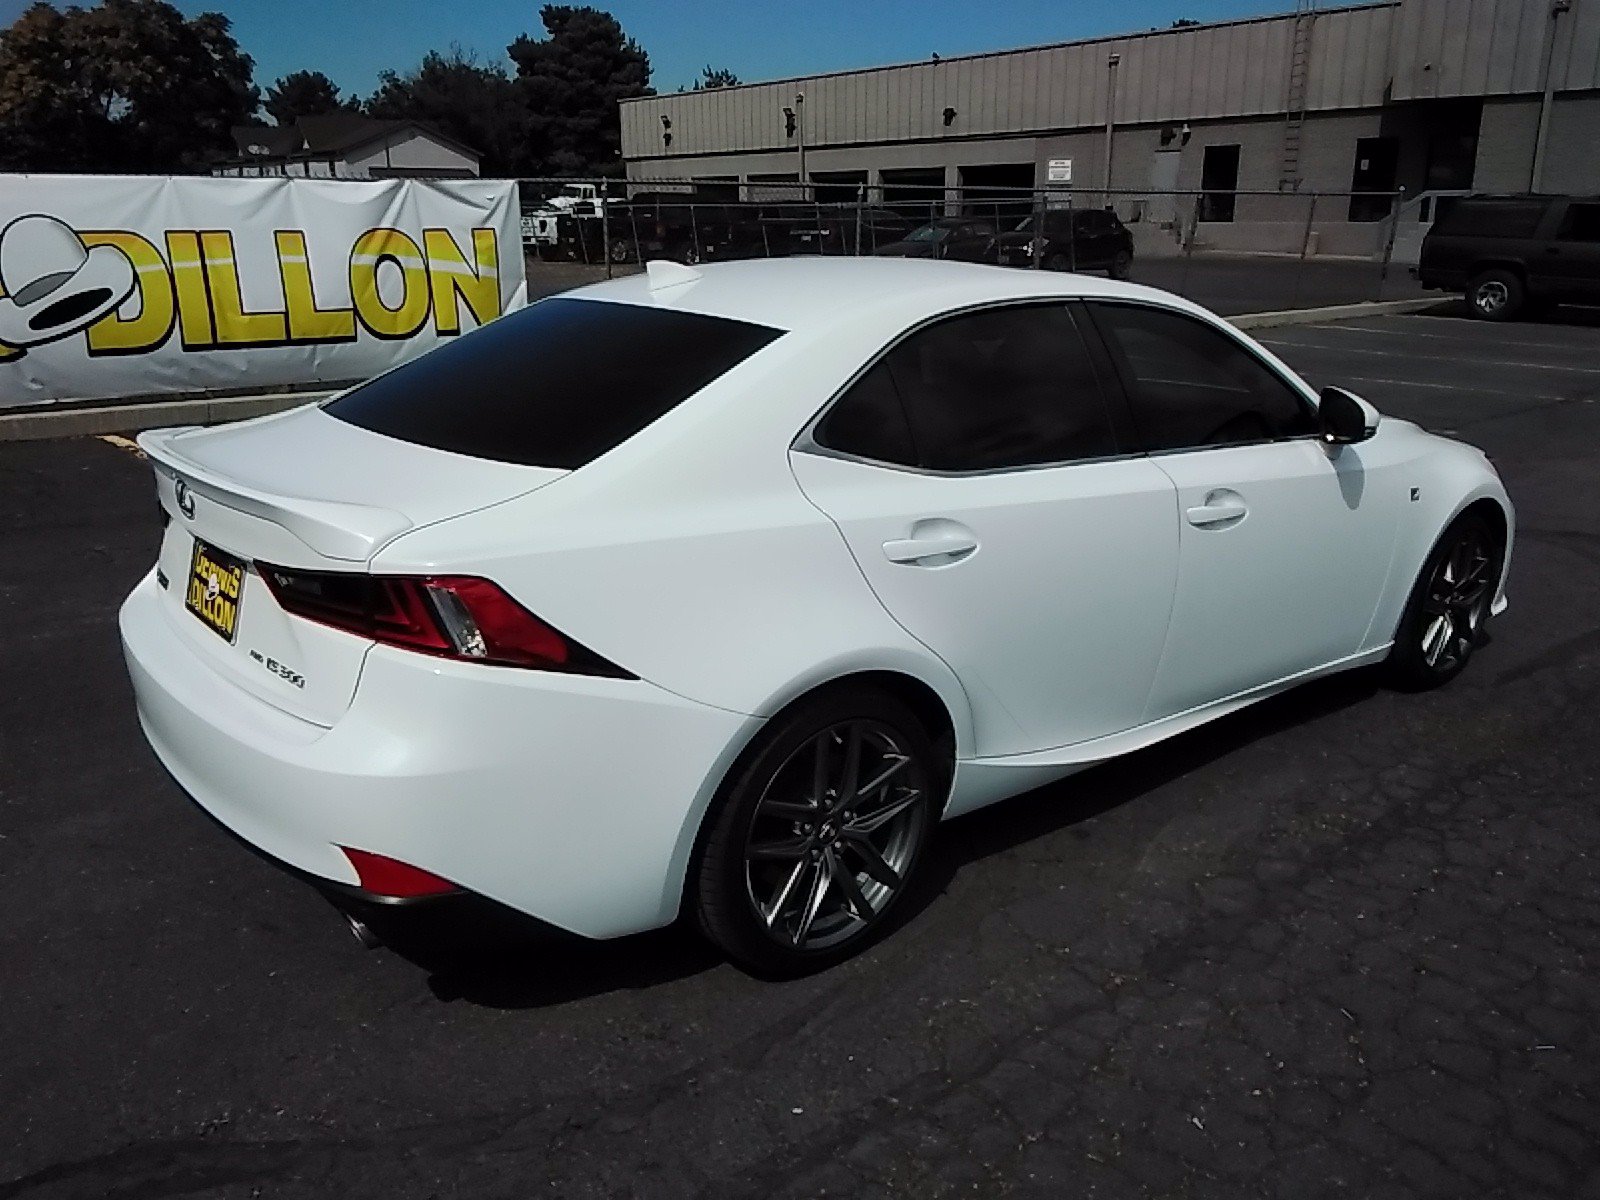 PreOwned 2016 Lexus IS 300 300 4dr Car in Boise 3L0897A